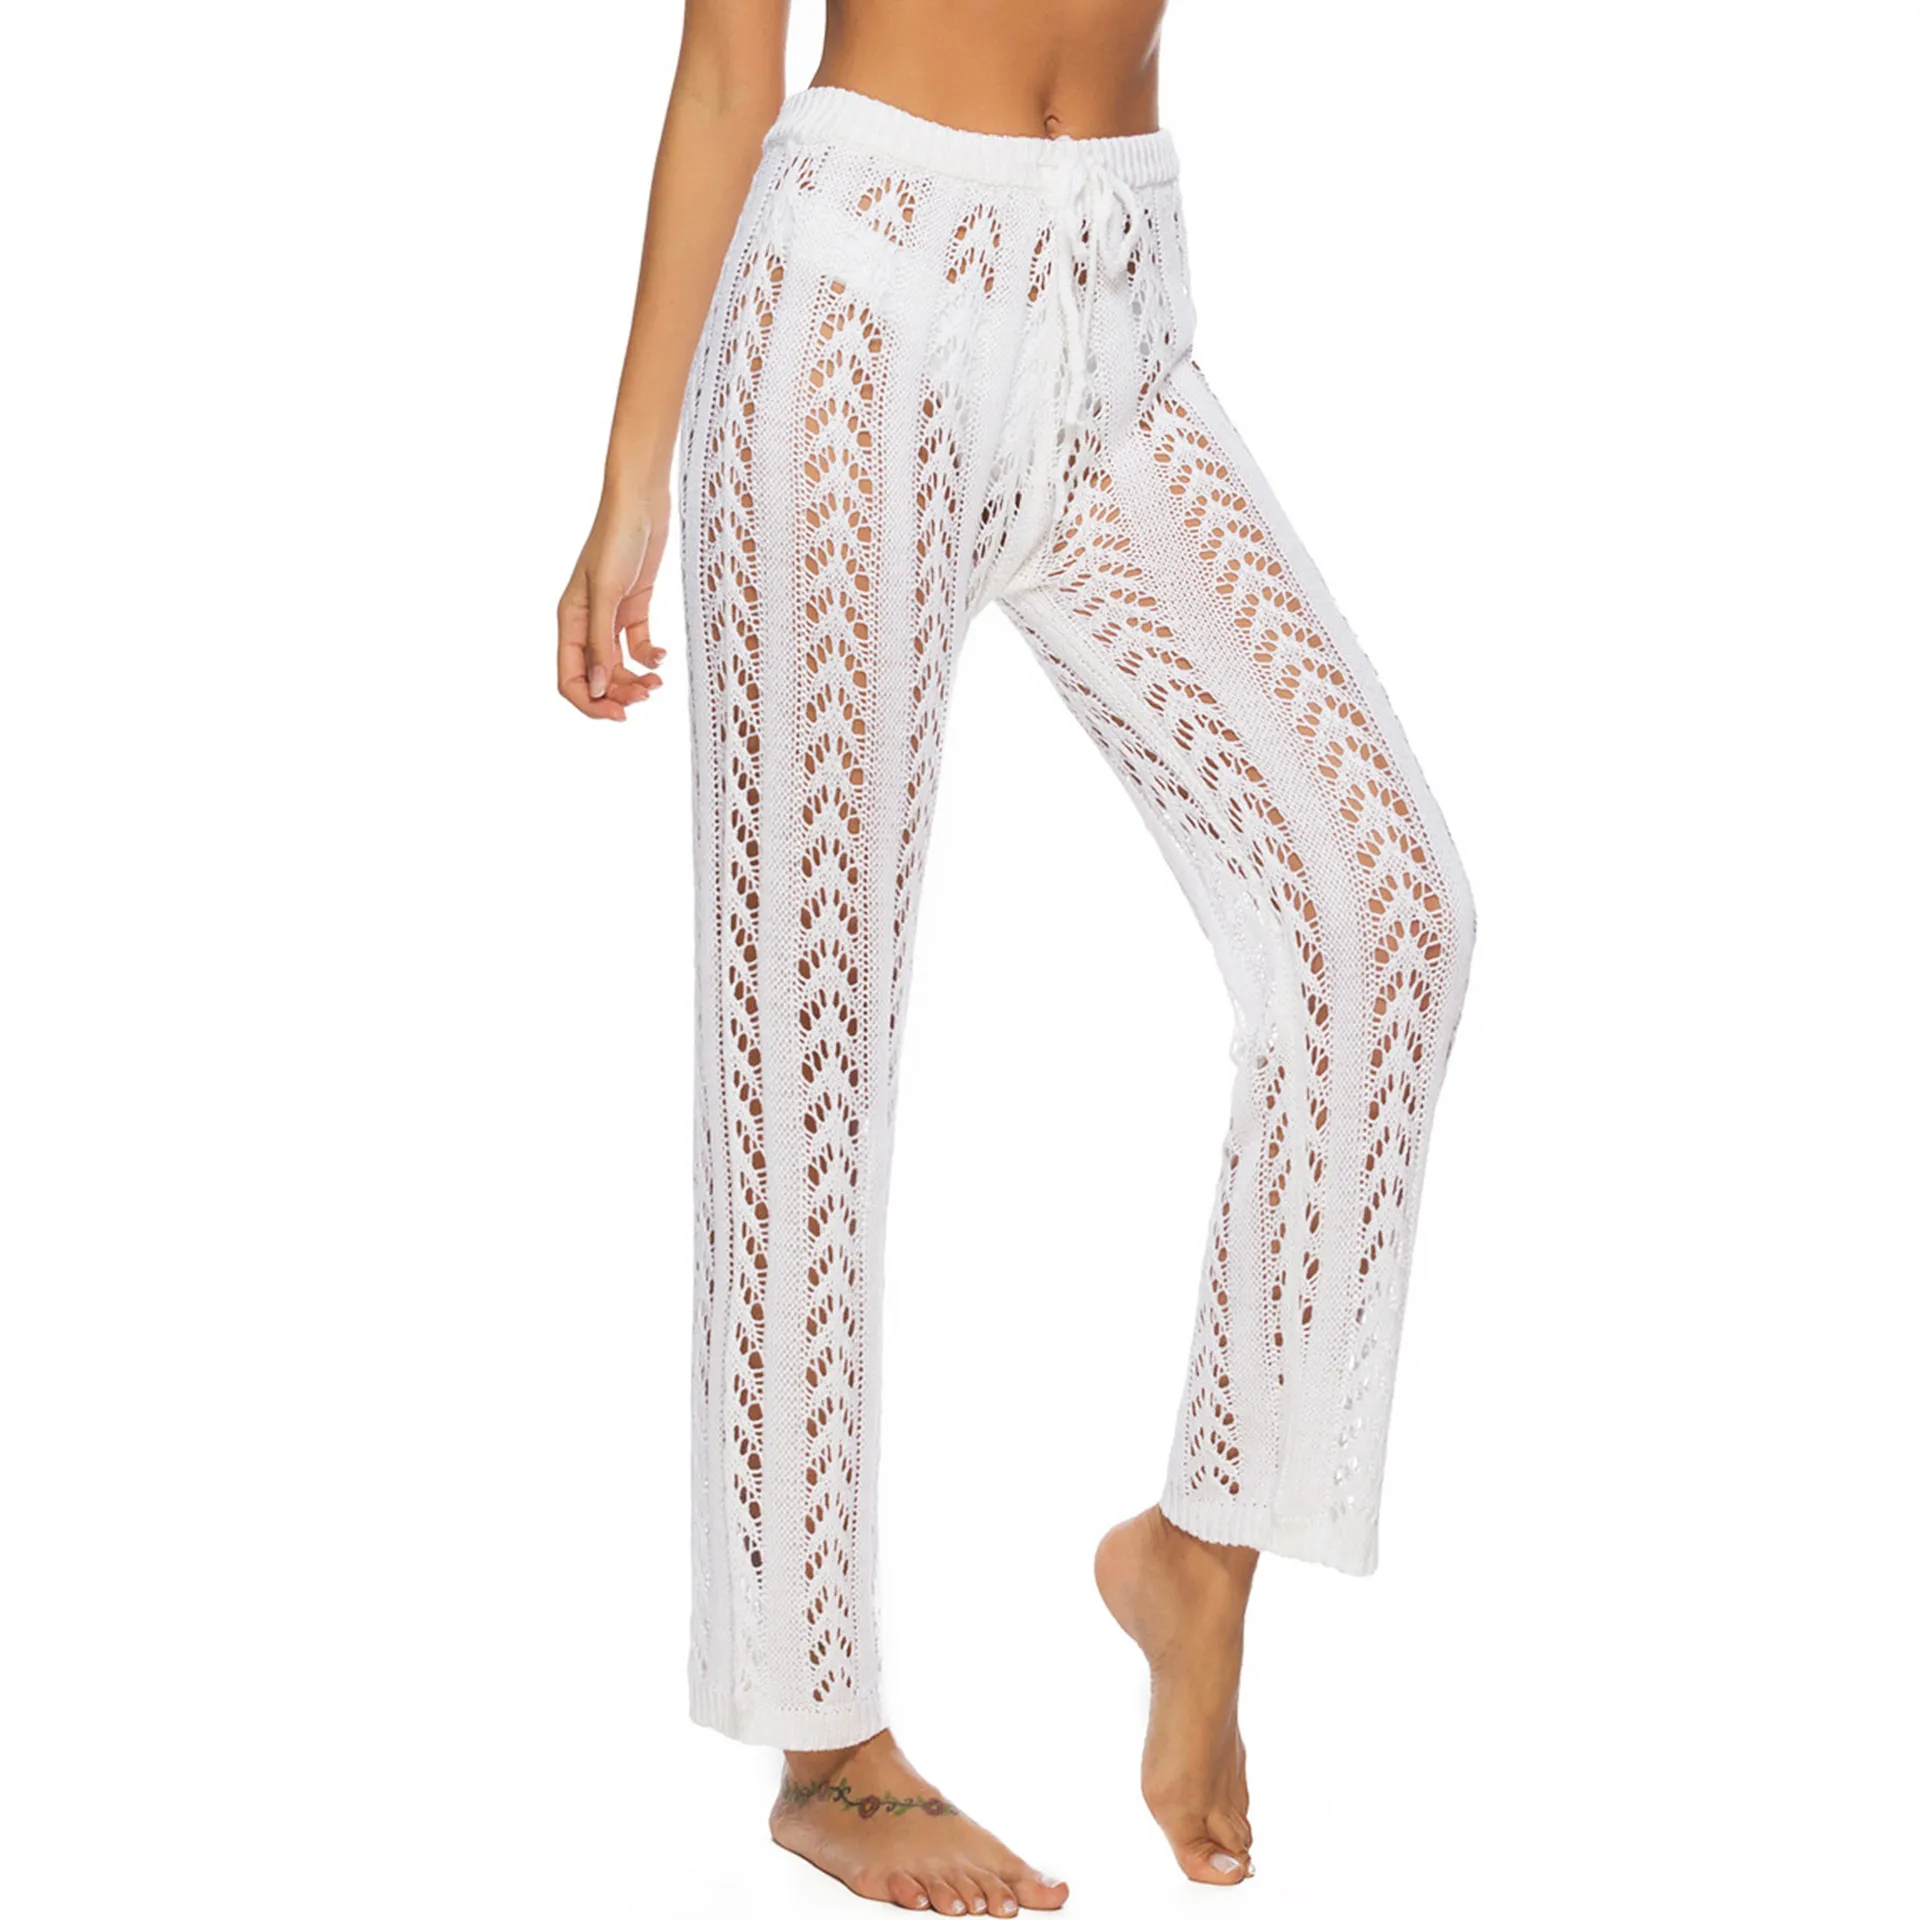 Solid Crochet Bikini Cover Up Long Beach Pants See Through Swimsuit Coverup Pant Wide Leg Beach Coverups Swimming Suit Women267a3592532